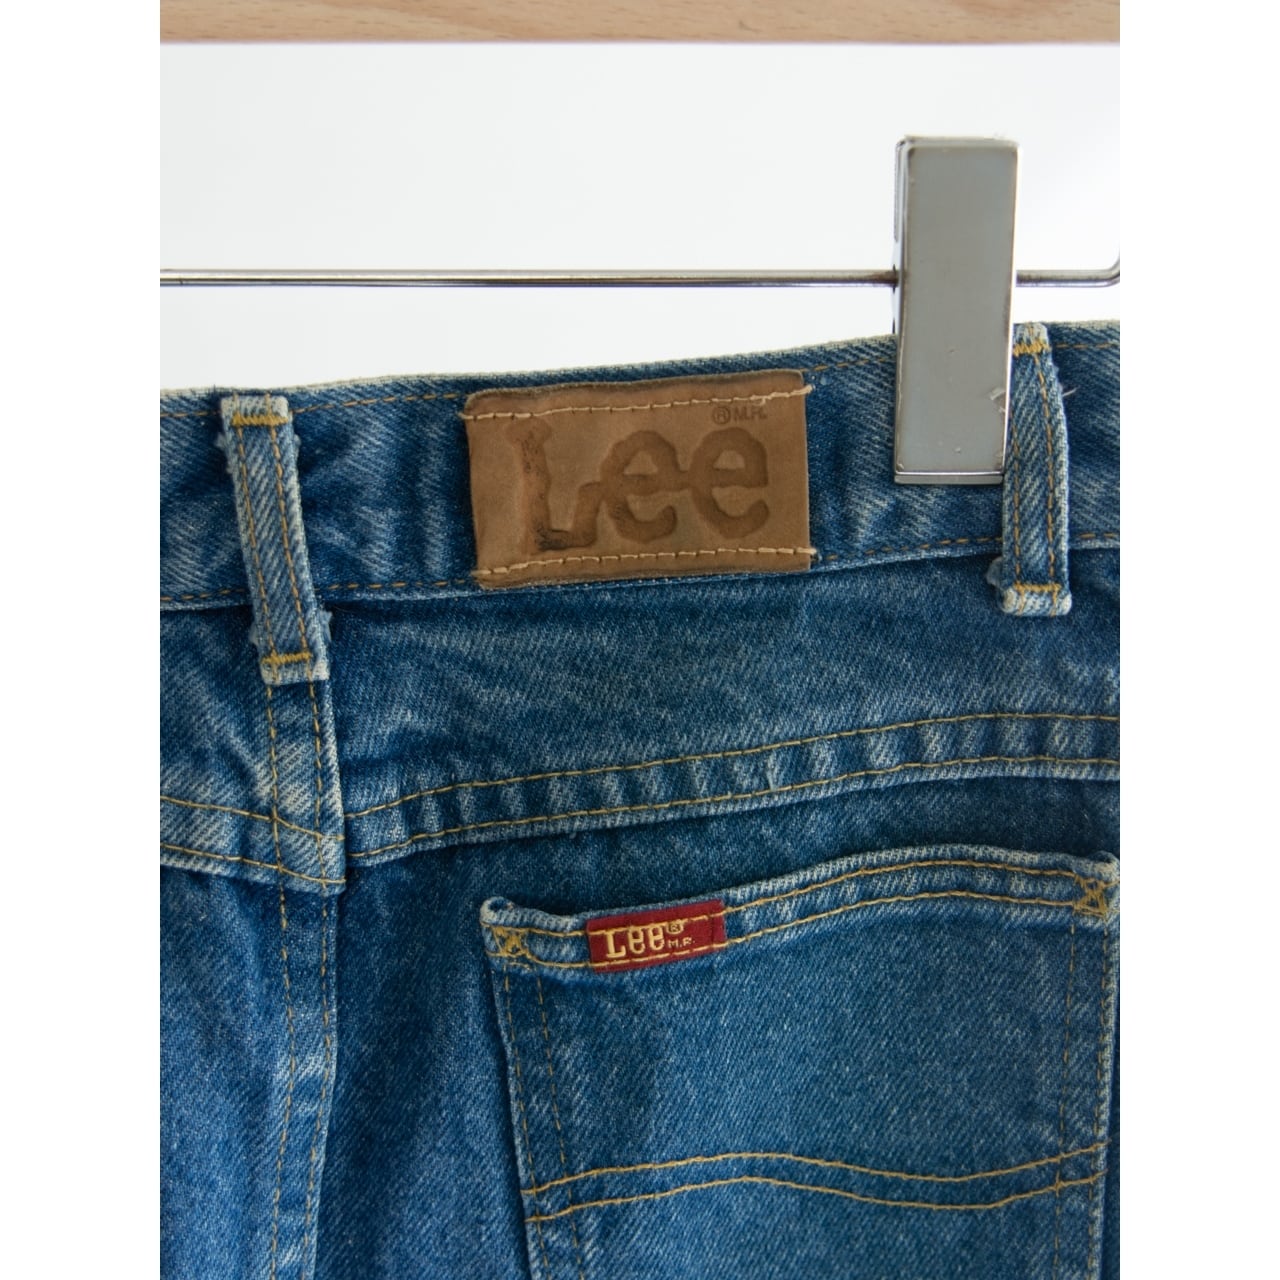 【Lee】Made in U.S.A. 80's Denim Skirt（リー アメリカ製 デニムスカート）